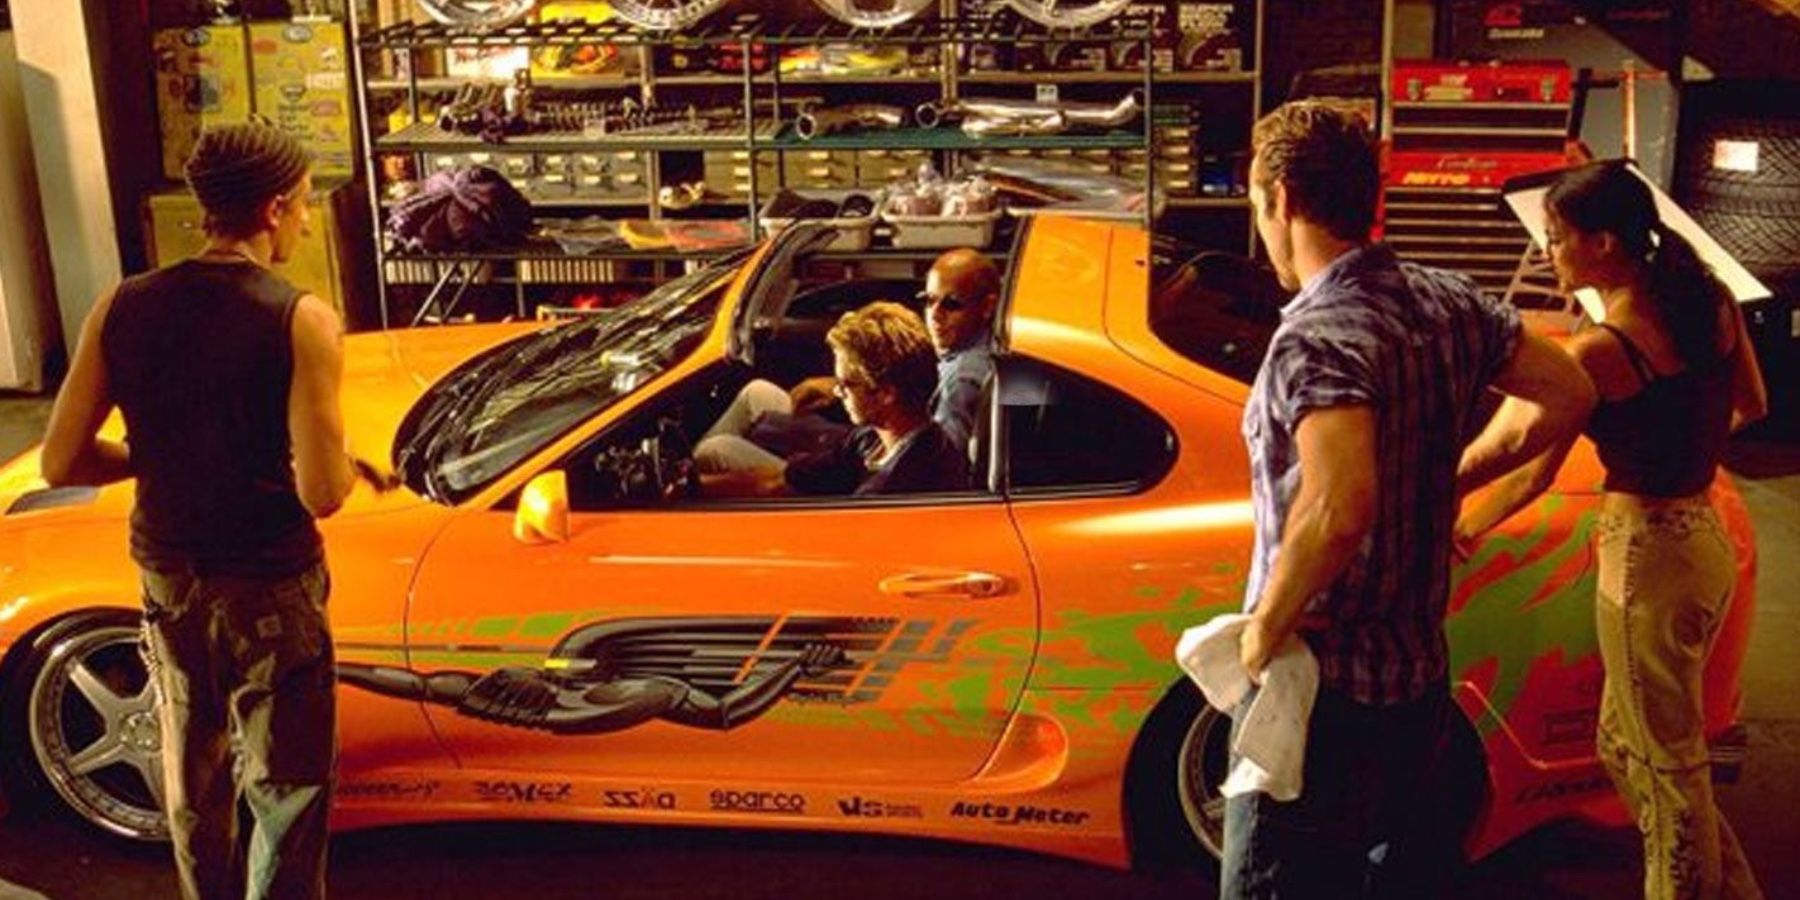 The-Fast-and-the-Furious-Jesse-Brian-Dom-Leon-and-Letty-in-a-car-garage